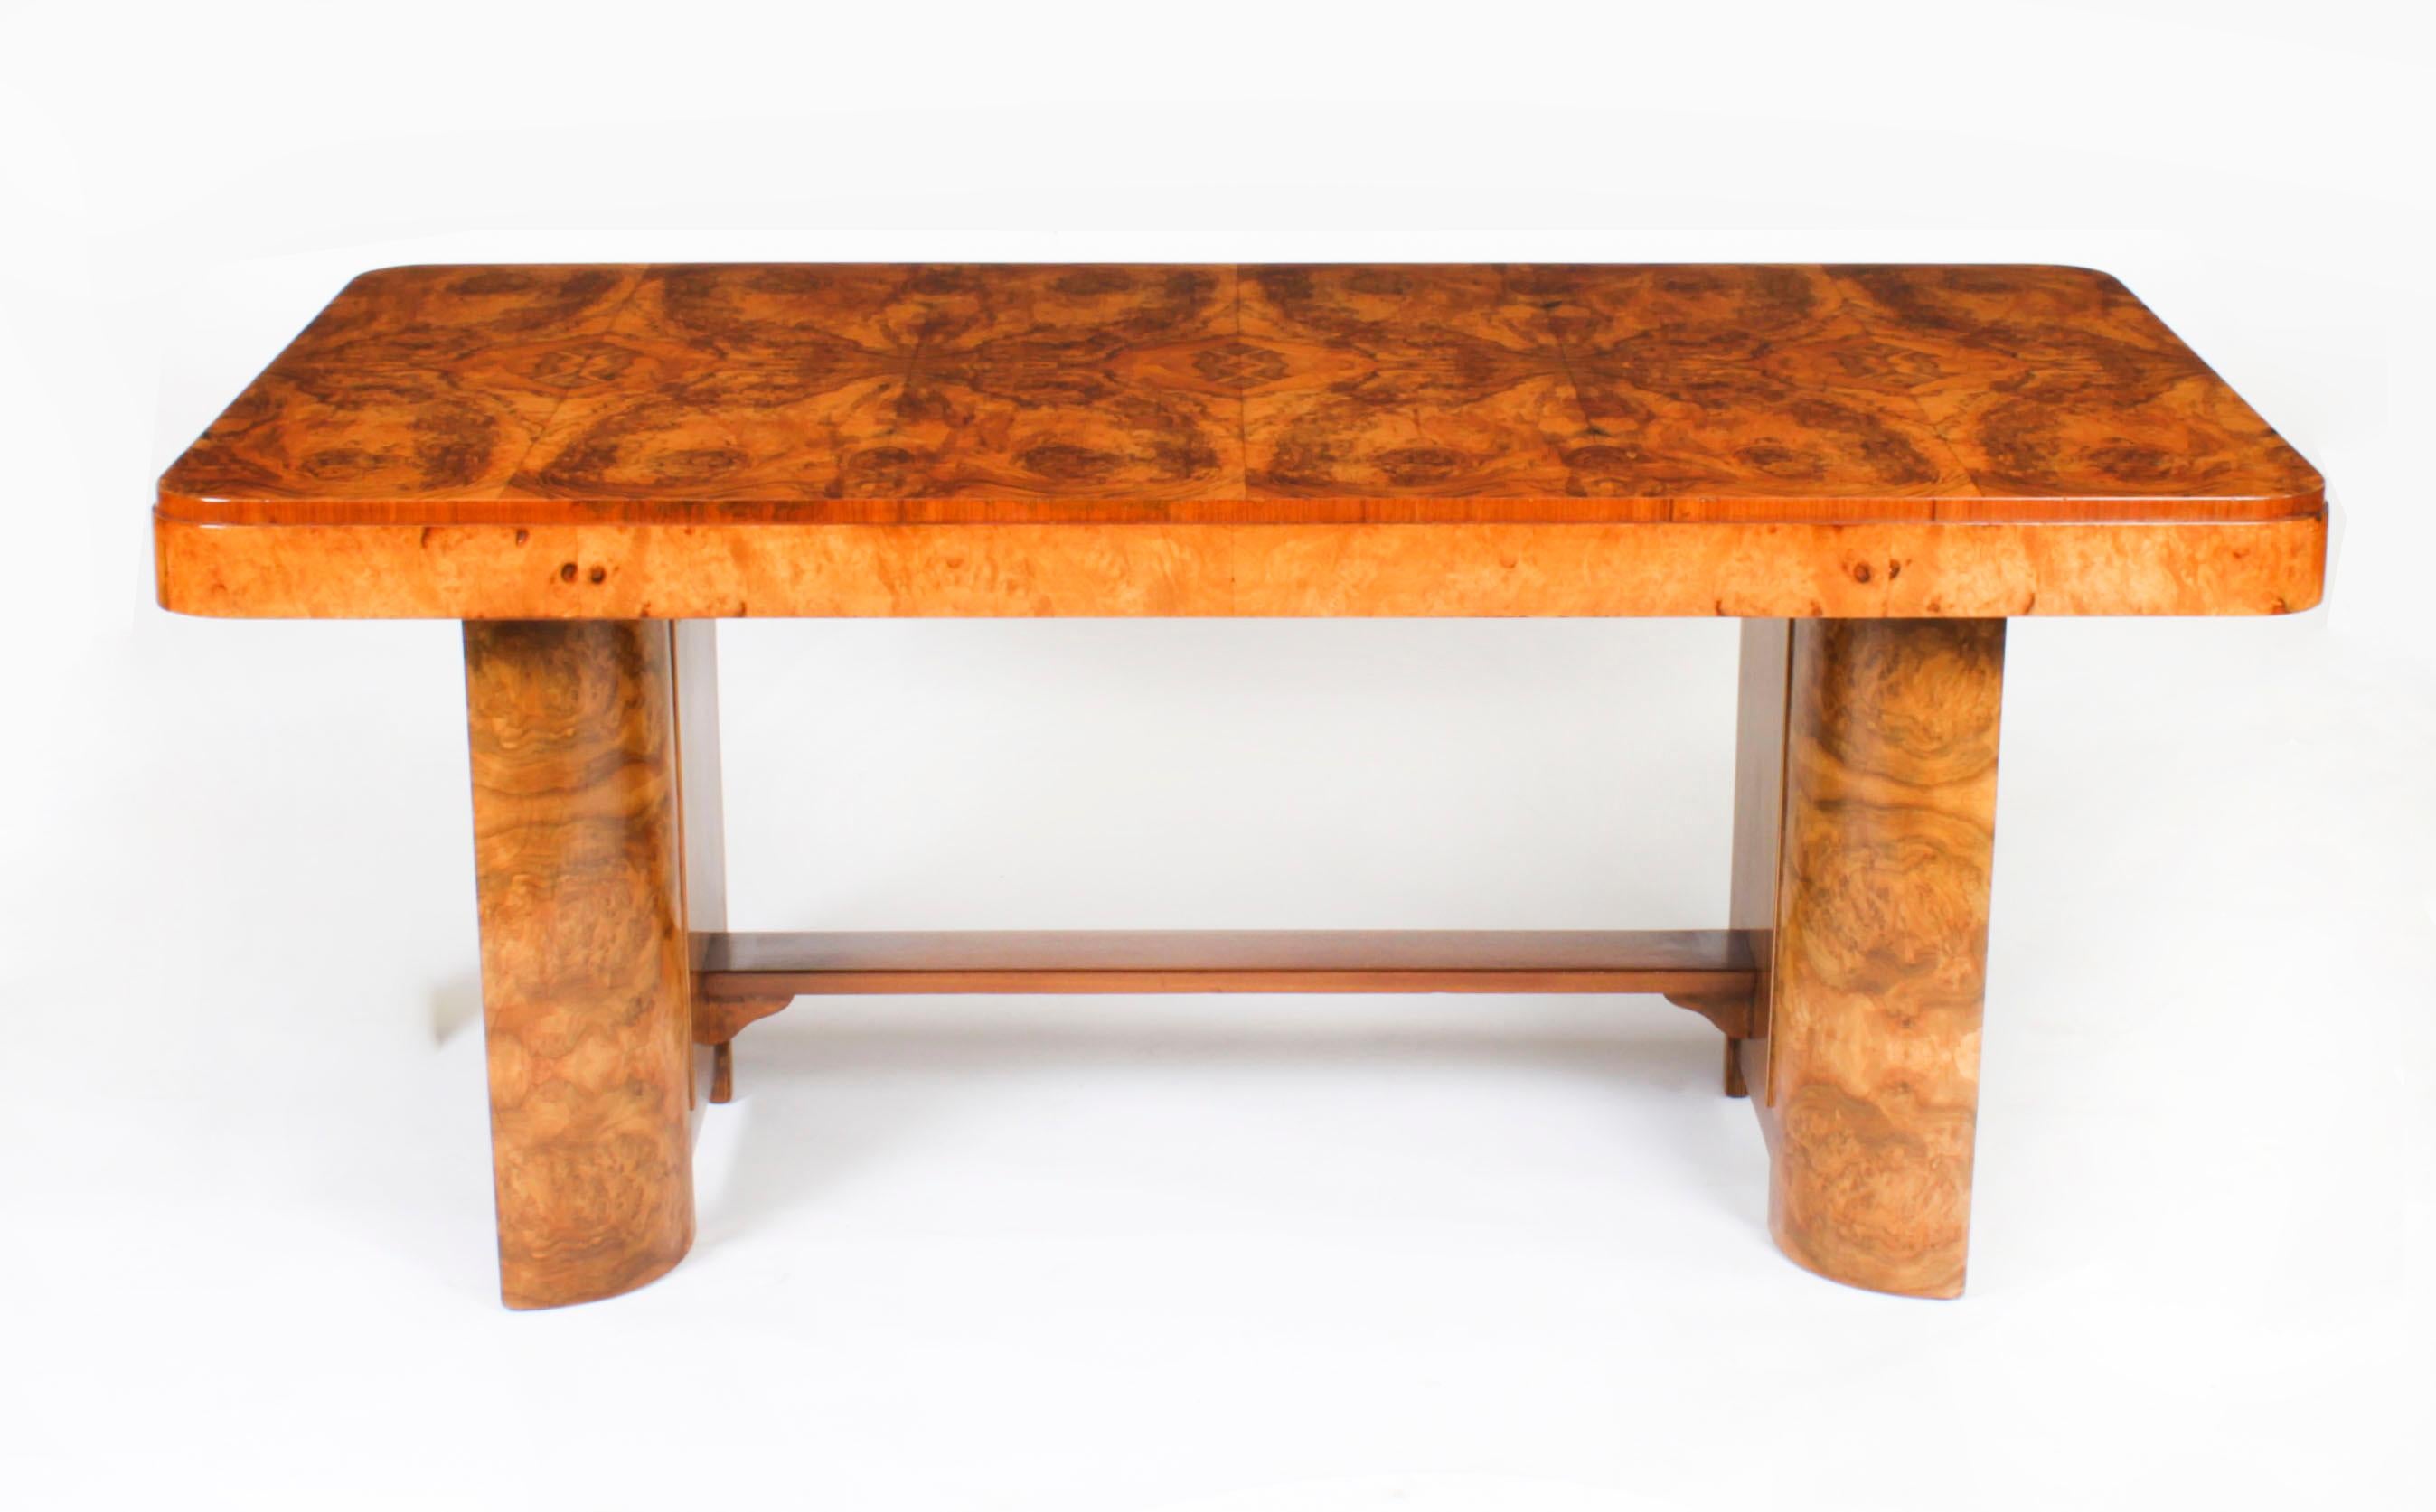 This is an elegant antique burr walnut and crossbanded Art Deco dining table, circa 1920 in date.
The rectangular top with fabulous burr walnut matched veneers and rounded corners.
 
It is raised on attractive twin shaped pedestal supports with